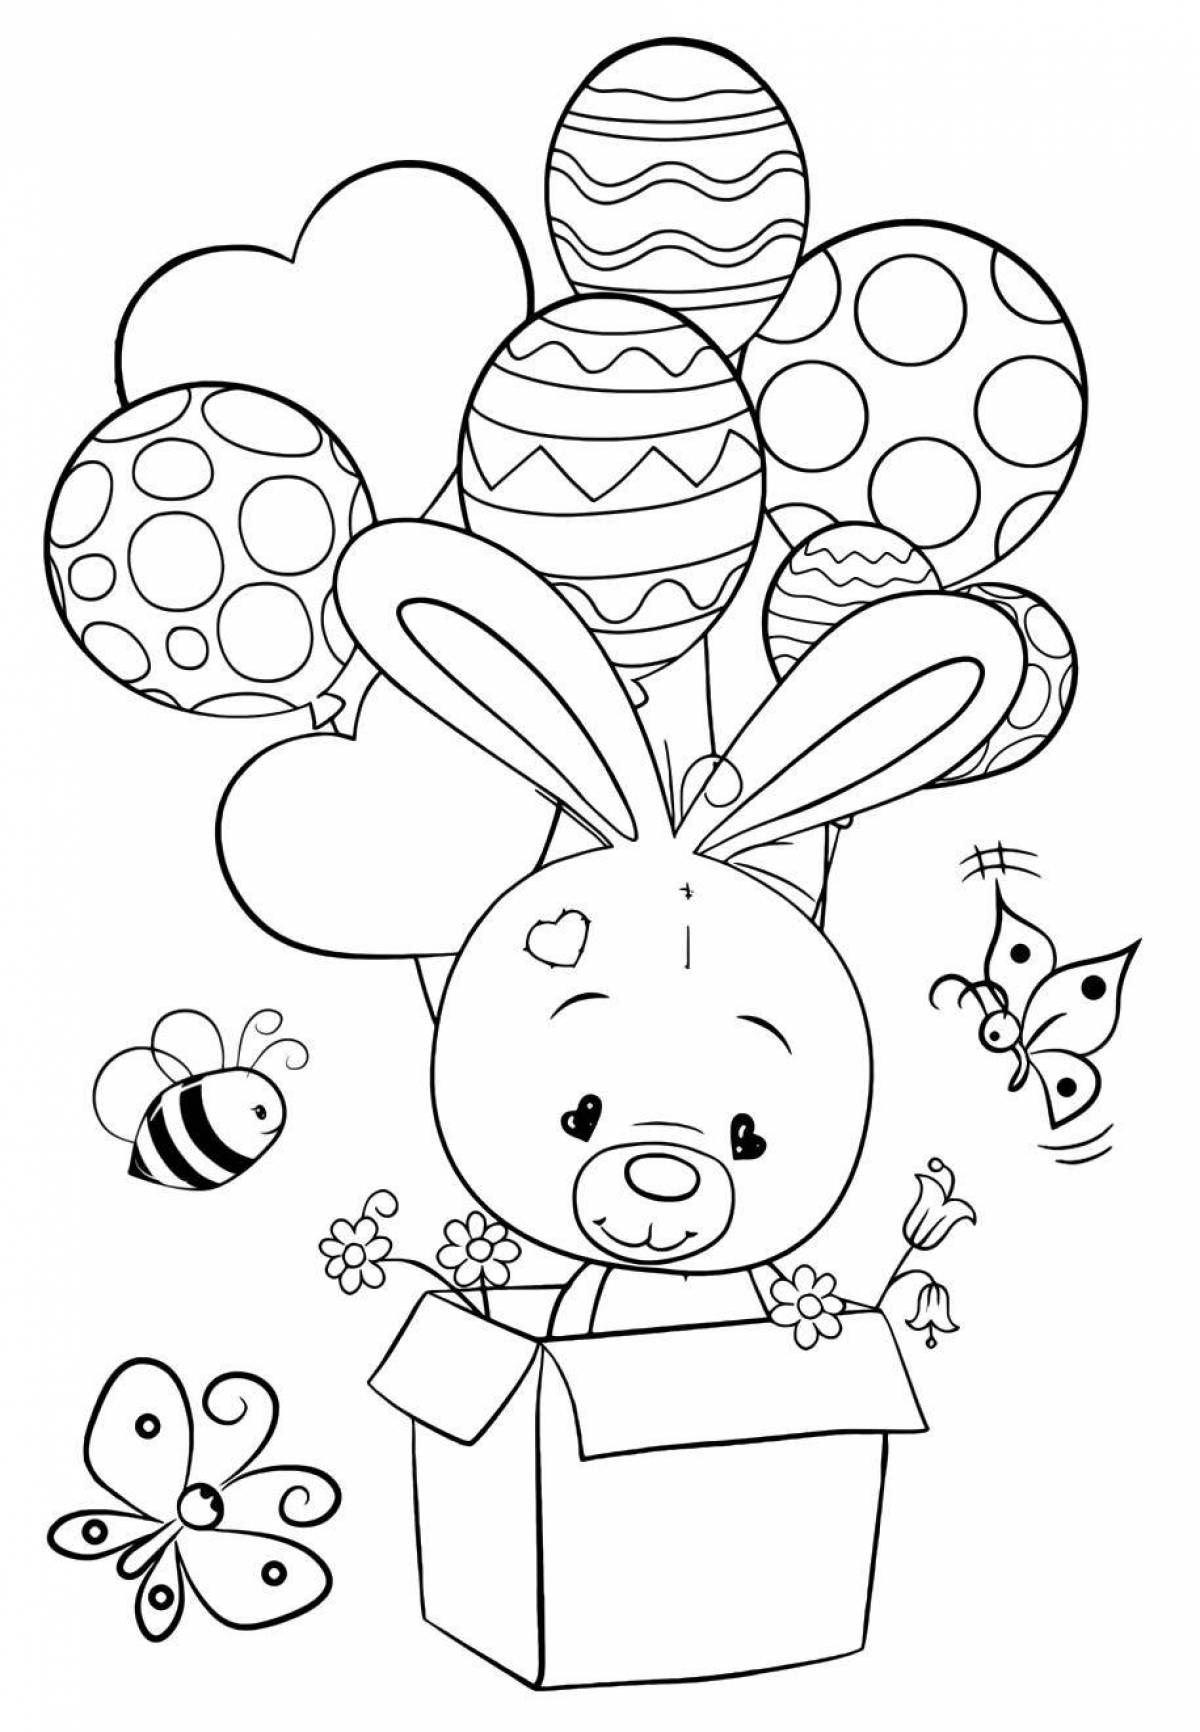 Brilliant coloring rabbit with a gift